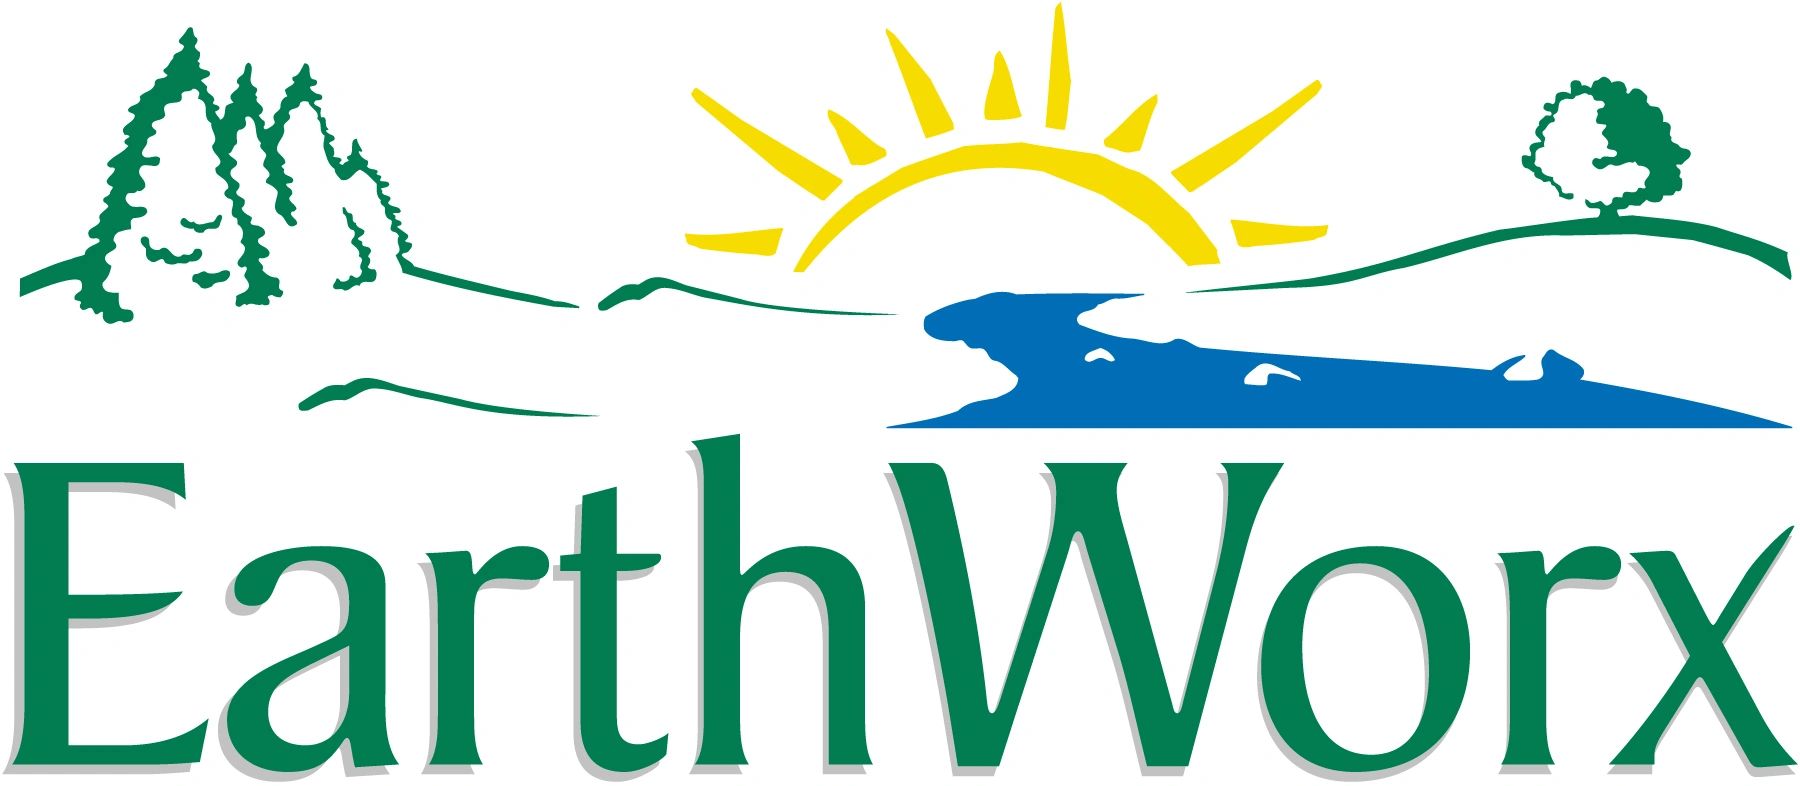 A green and yellow logo for the earth works.